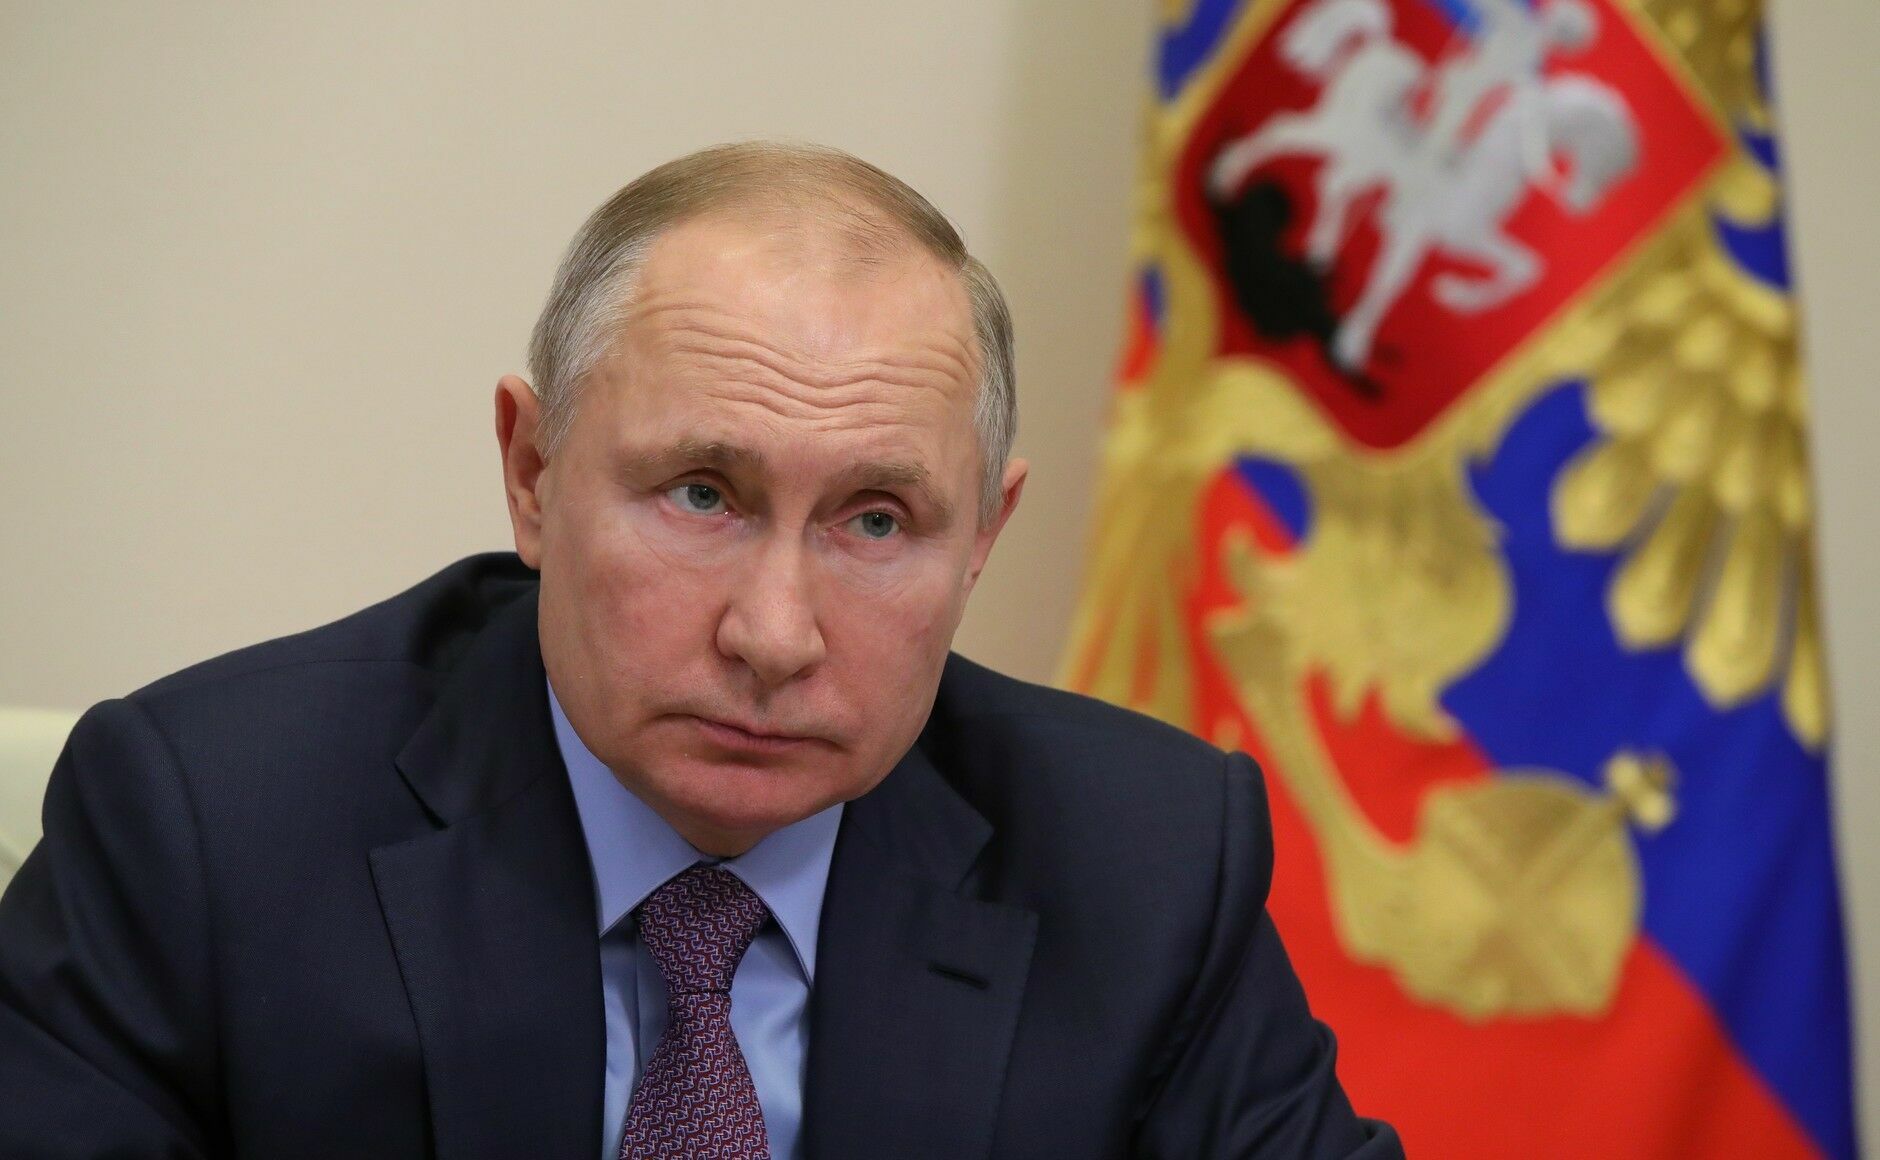 Vladimir Putin said that the tragedy in the Donbass forced the Russian Federation to launch a special operation